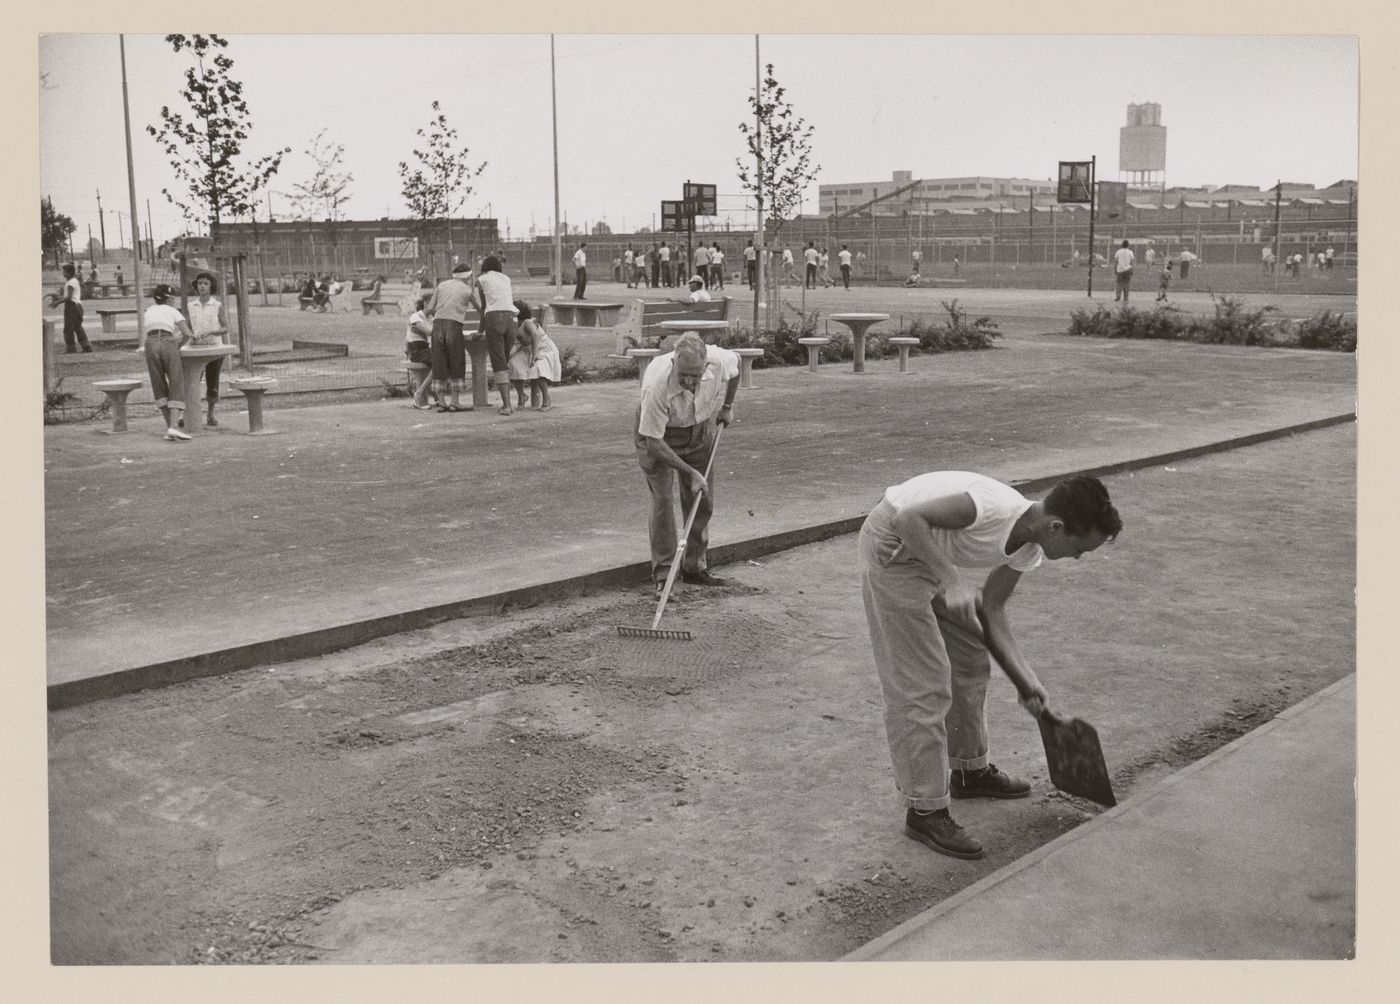 View of work being done for Recreational area, 18th and Bigler Streets, Philadelphia, Pennsylvania